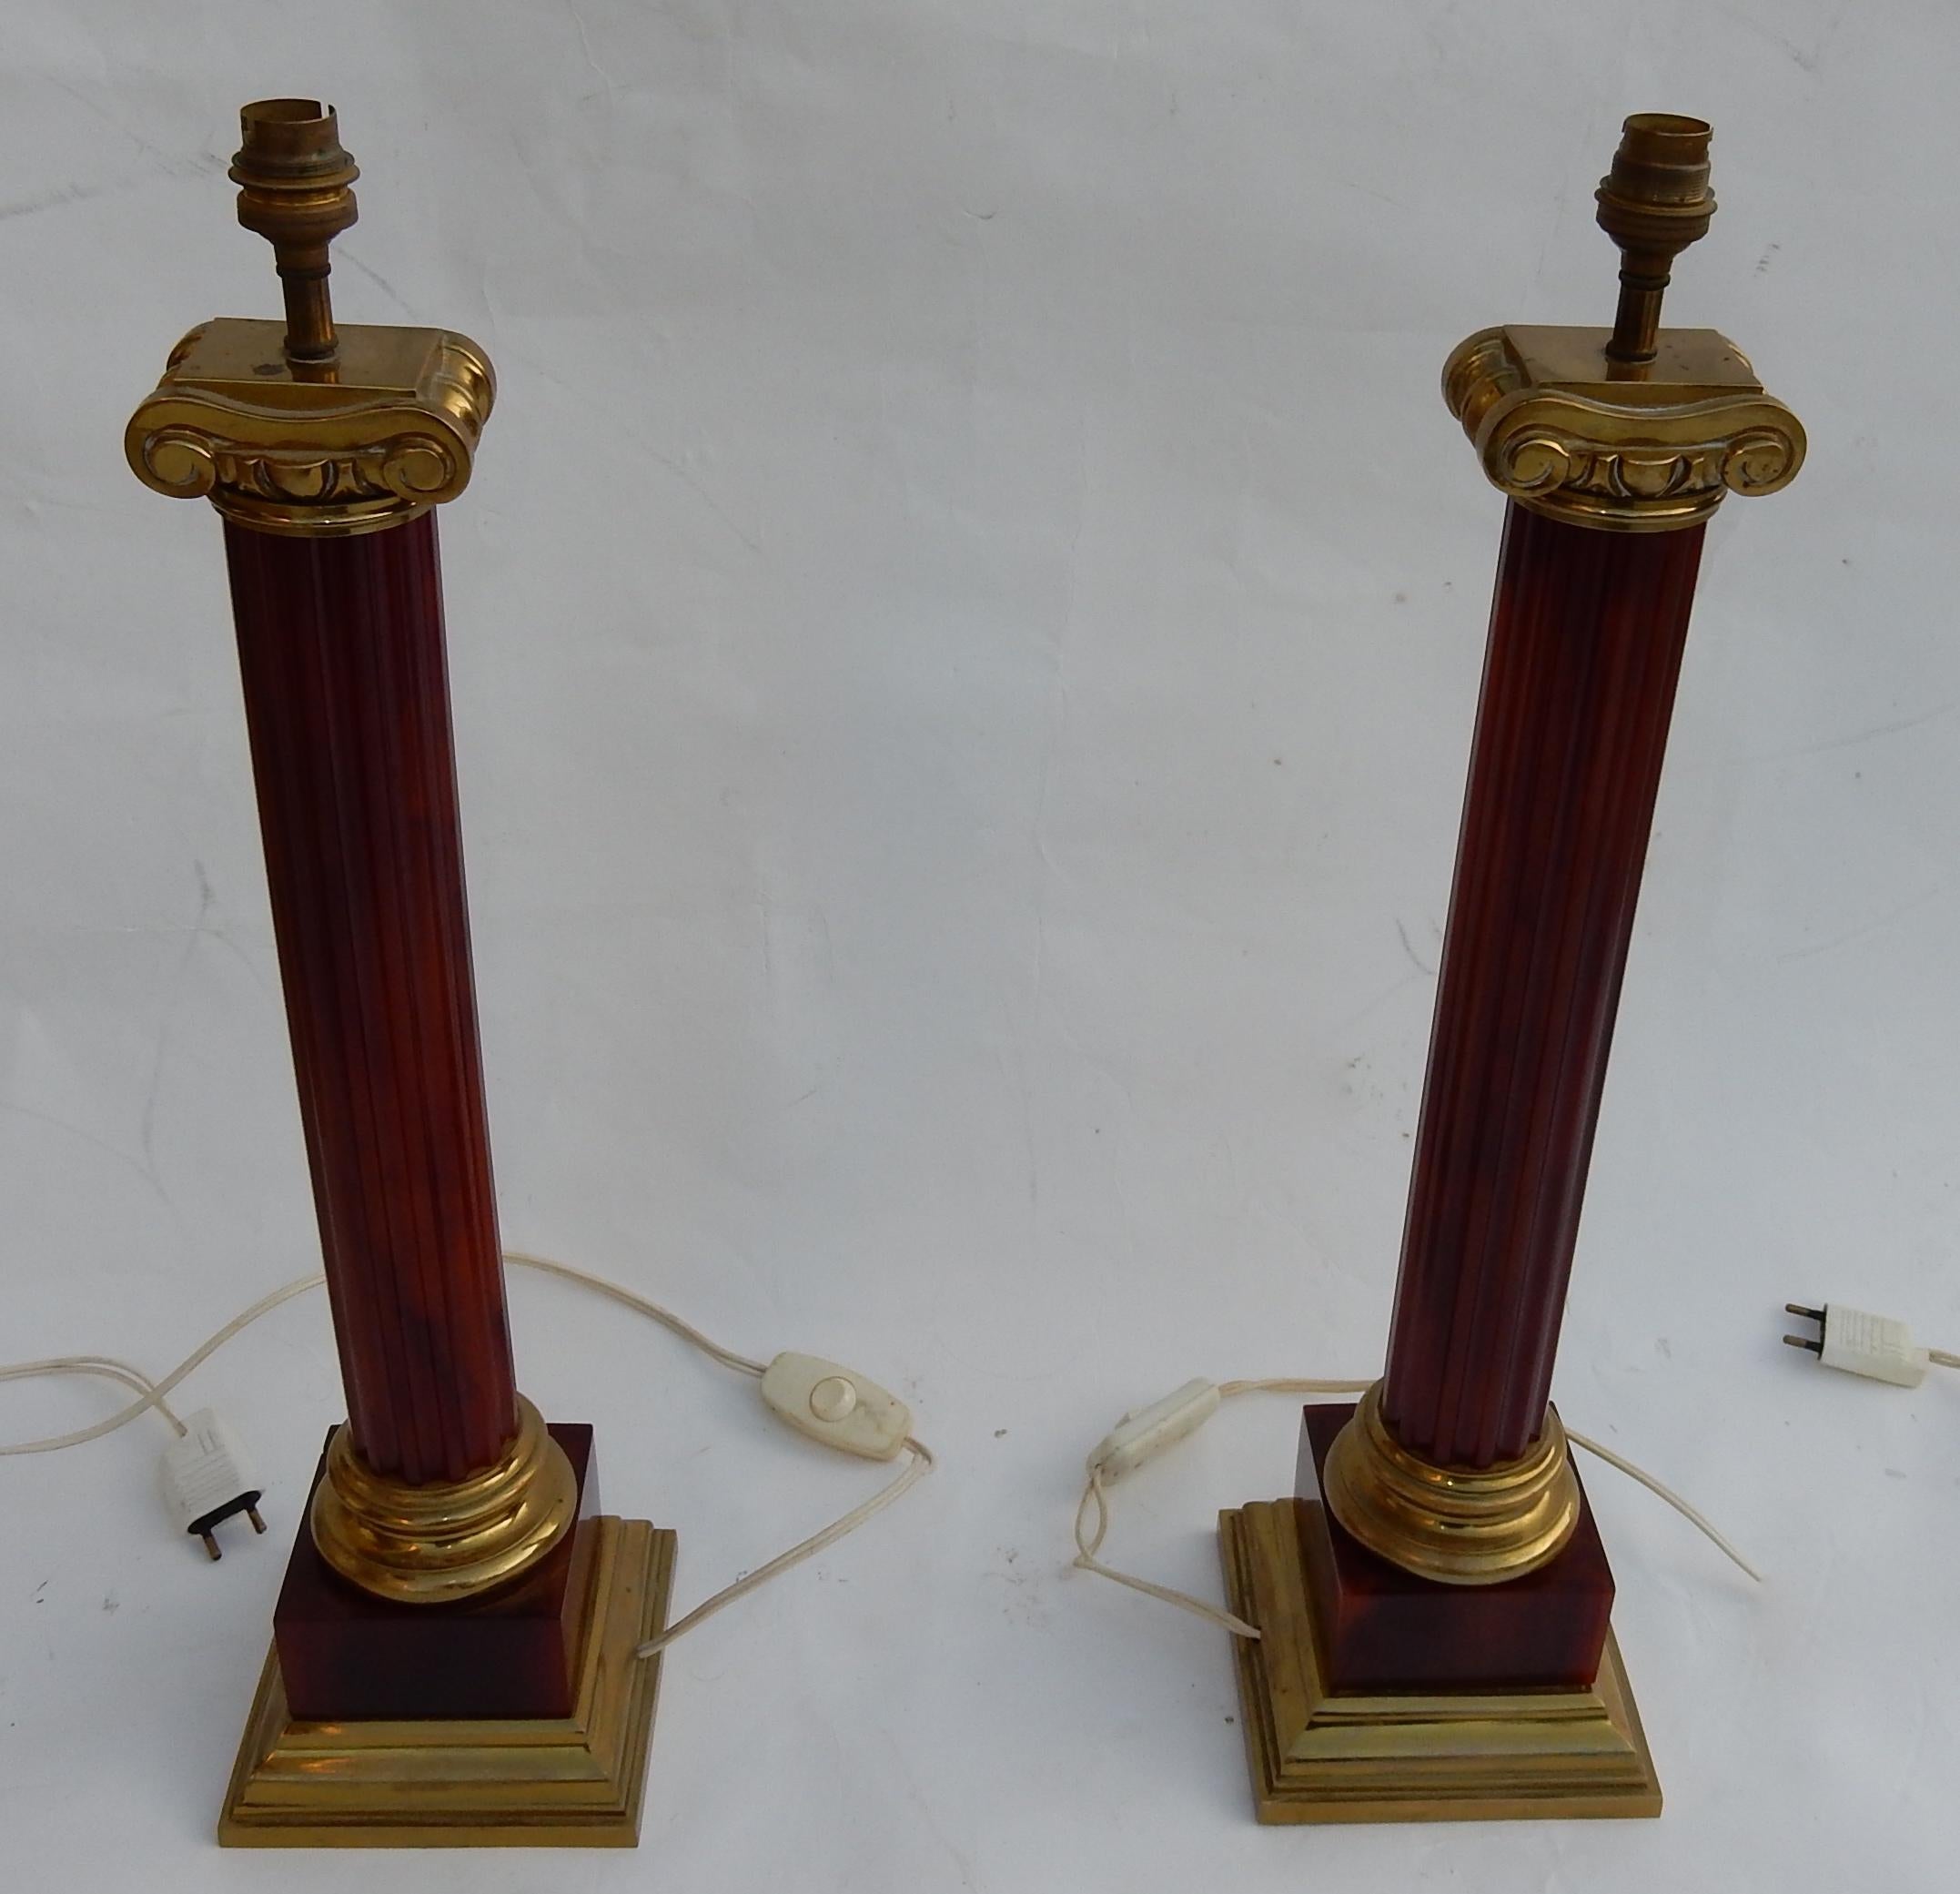 1950-1970 Pair of Maison Jansen Lamps, Gilt Bronze and Bakelite, Amber Color For Sale 1